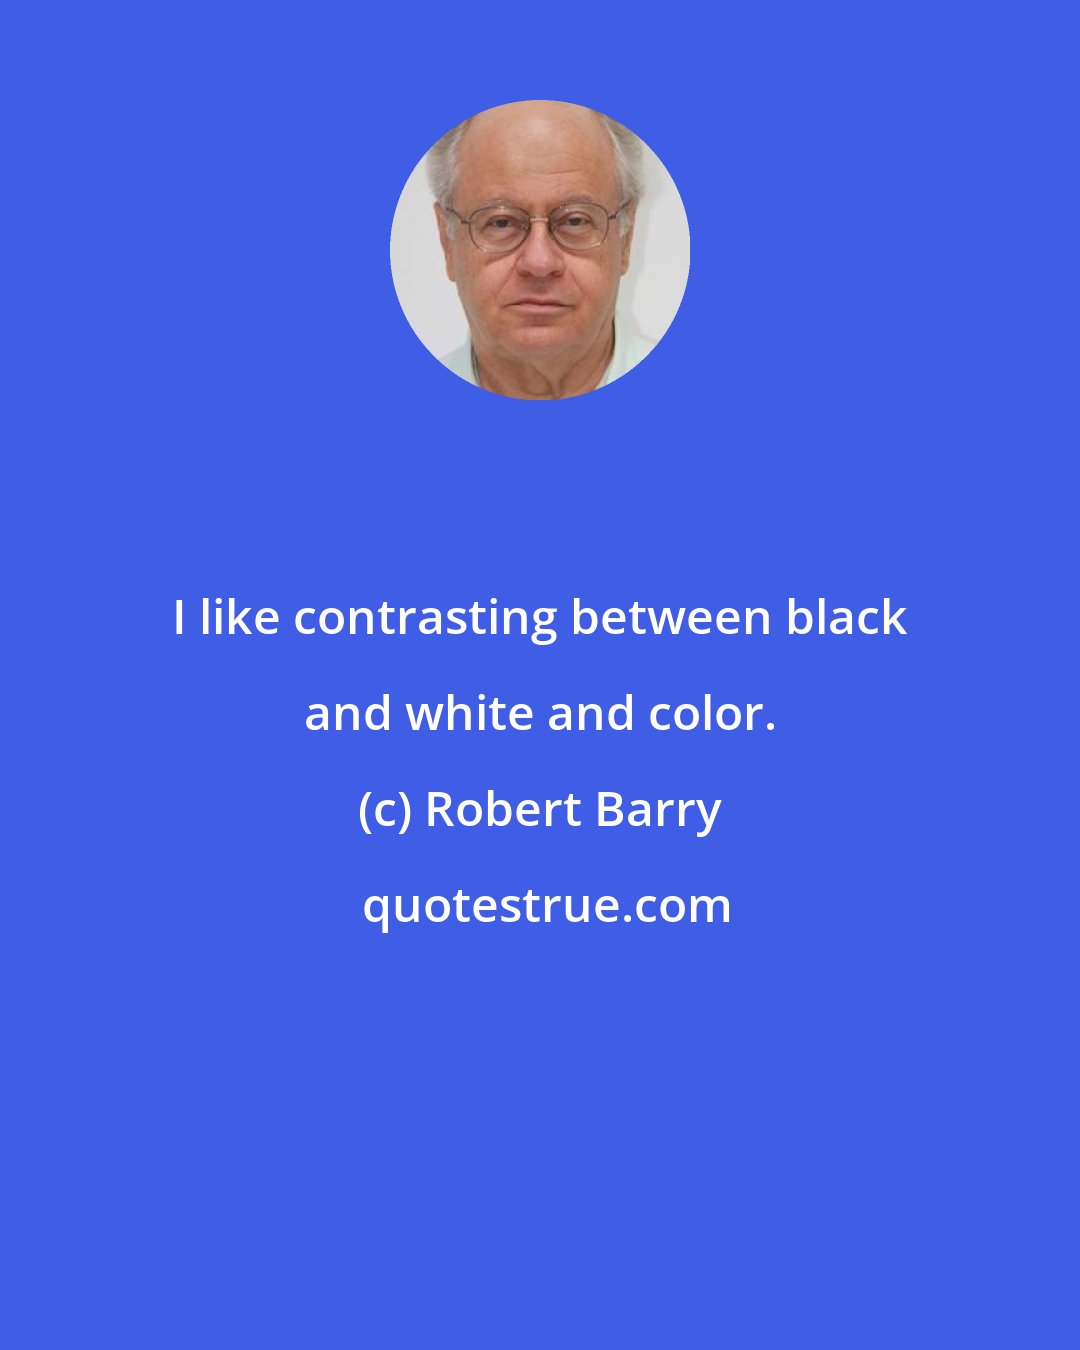 Robert Barry: I like contrasting between black and white and color.